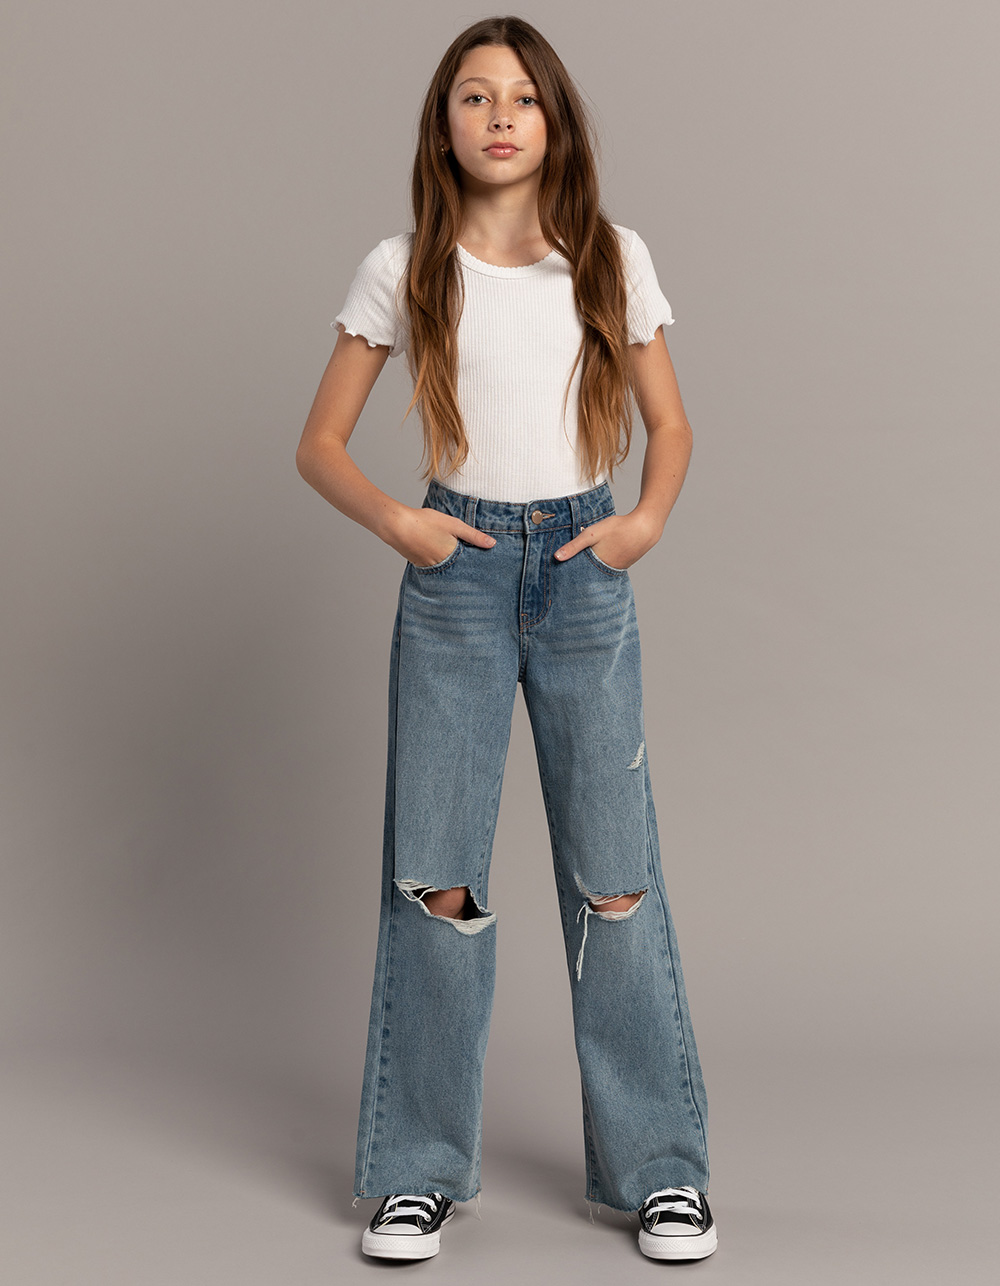 Tollder Girl High Elastic Waist Flare Leg Pants Casual Long Wide Leg Pants  Jeans Trousers Wear Girls Clothes for Girls Size 14-16